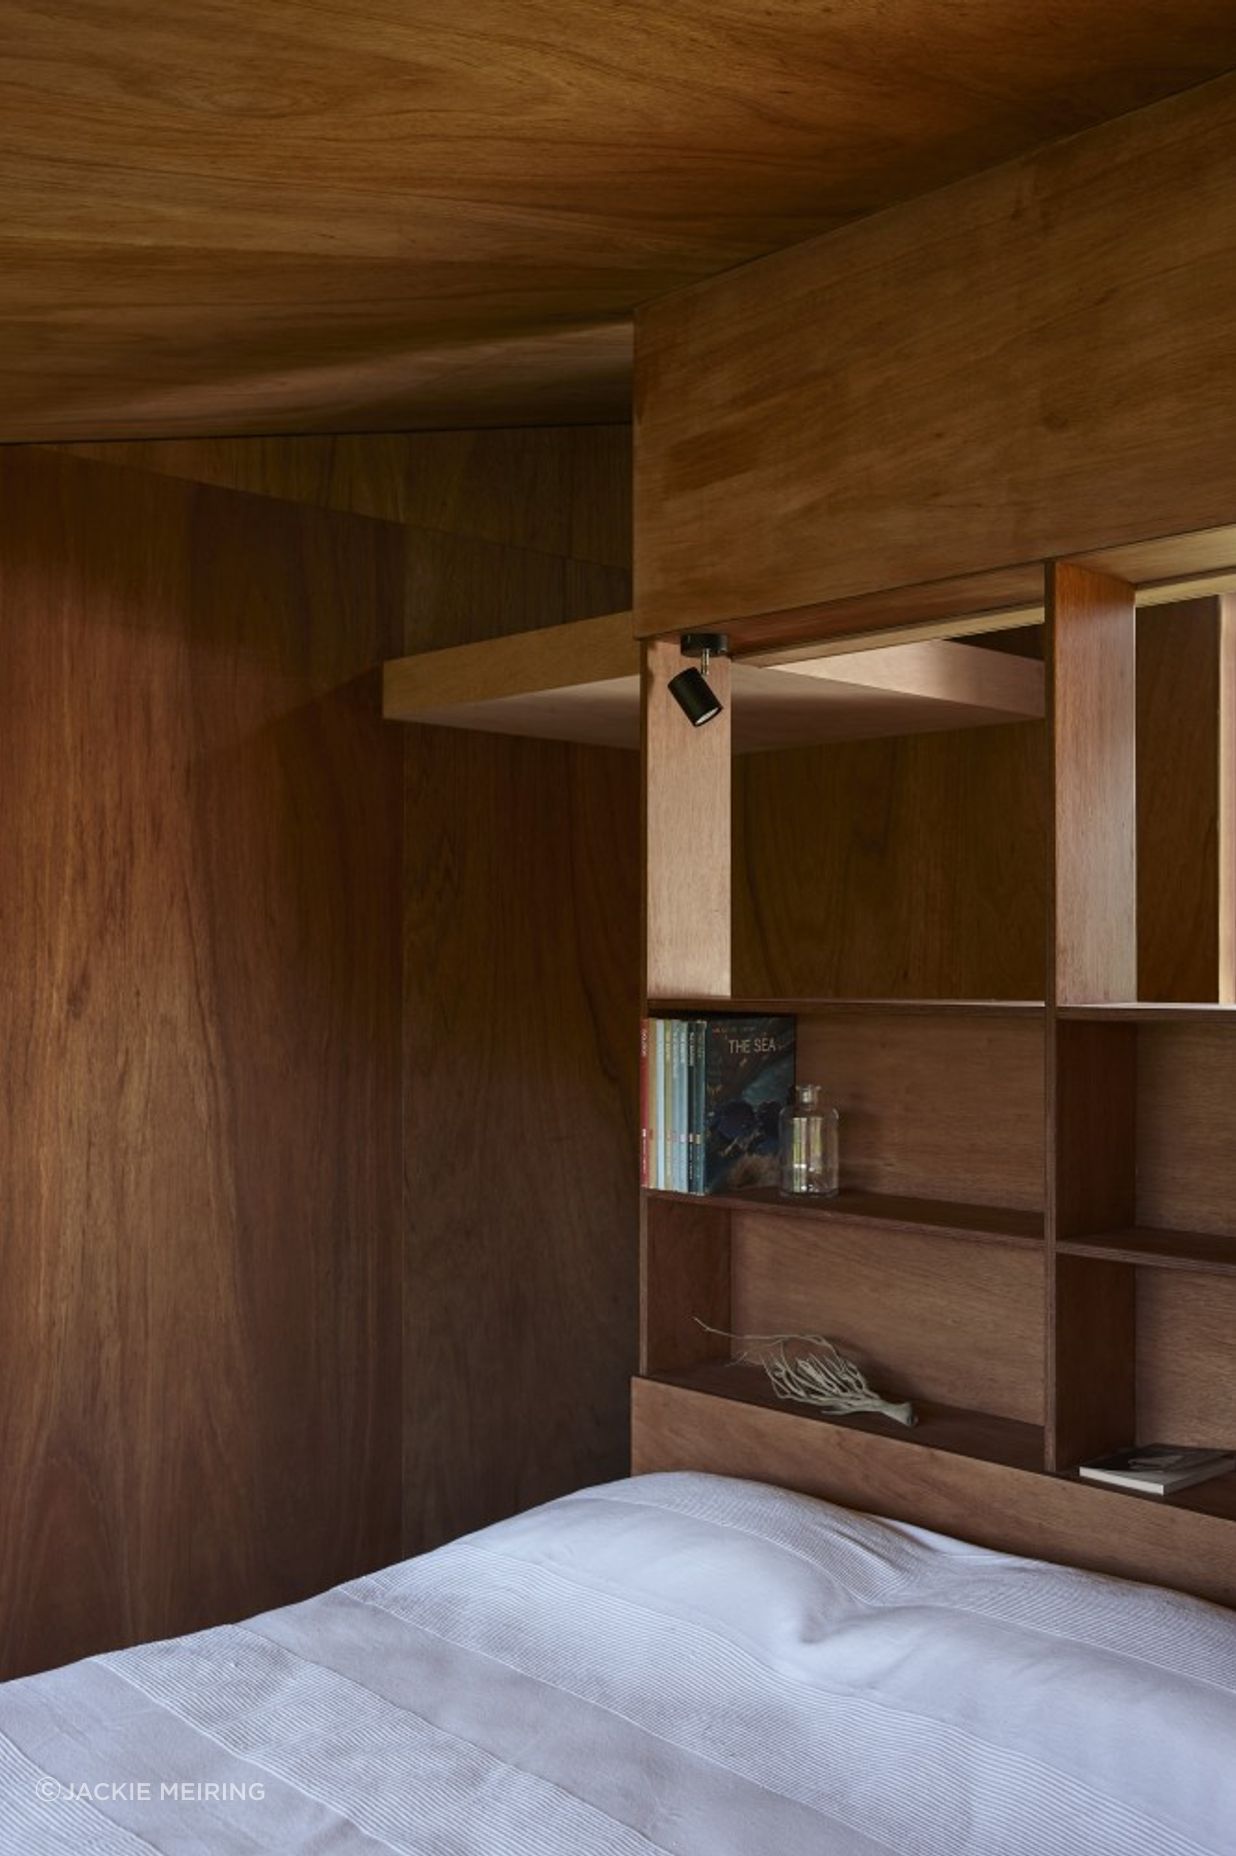 The sleeping pod features built-in shelving.